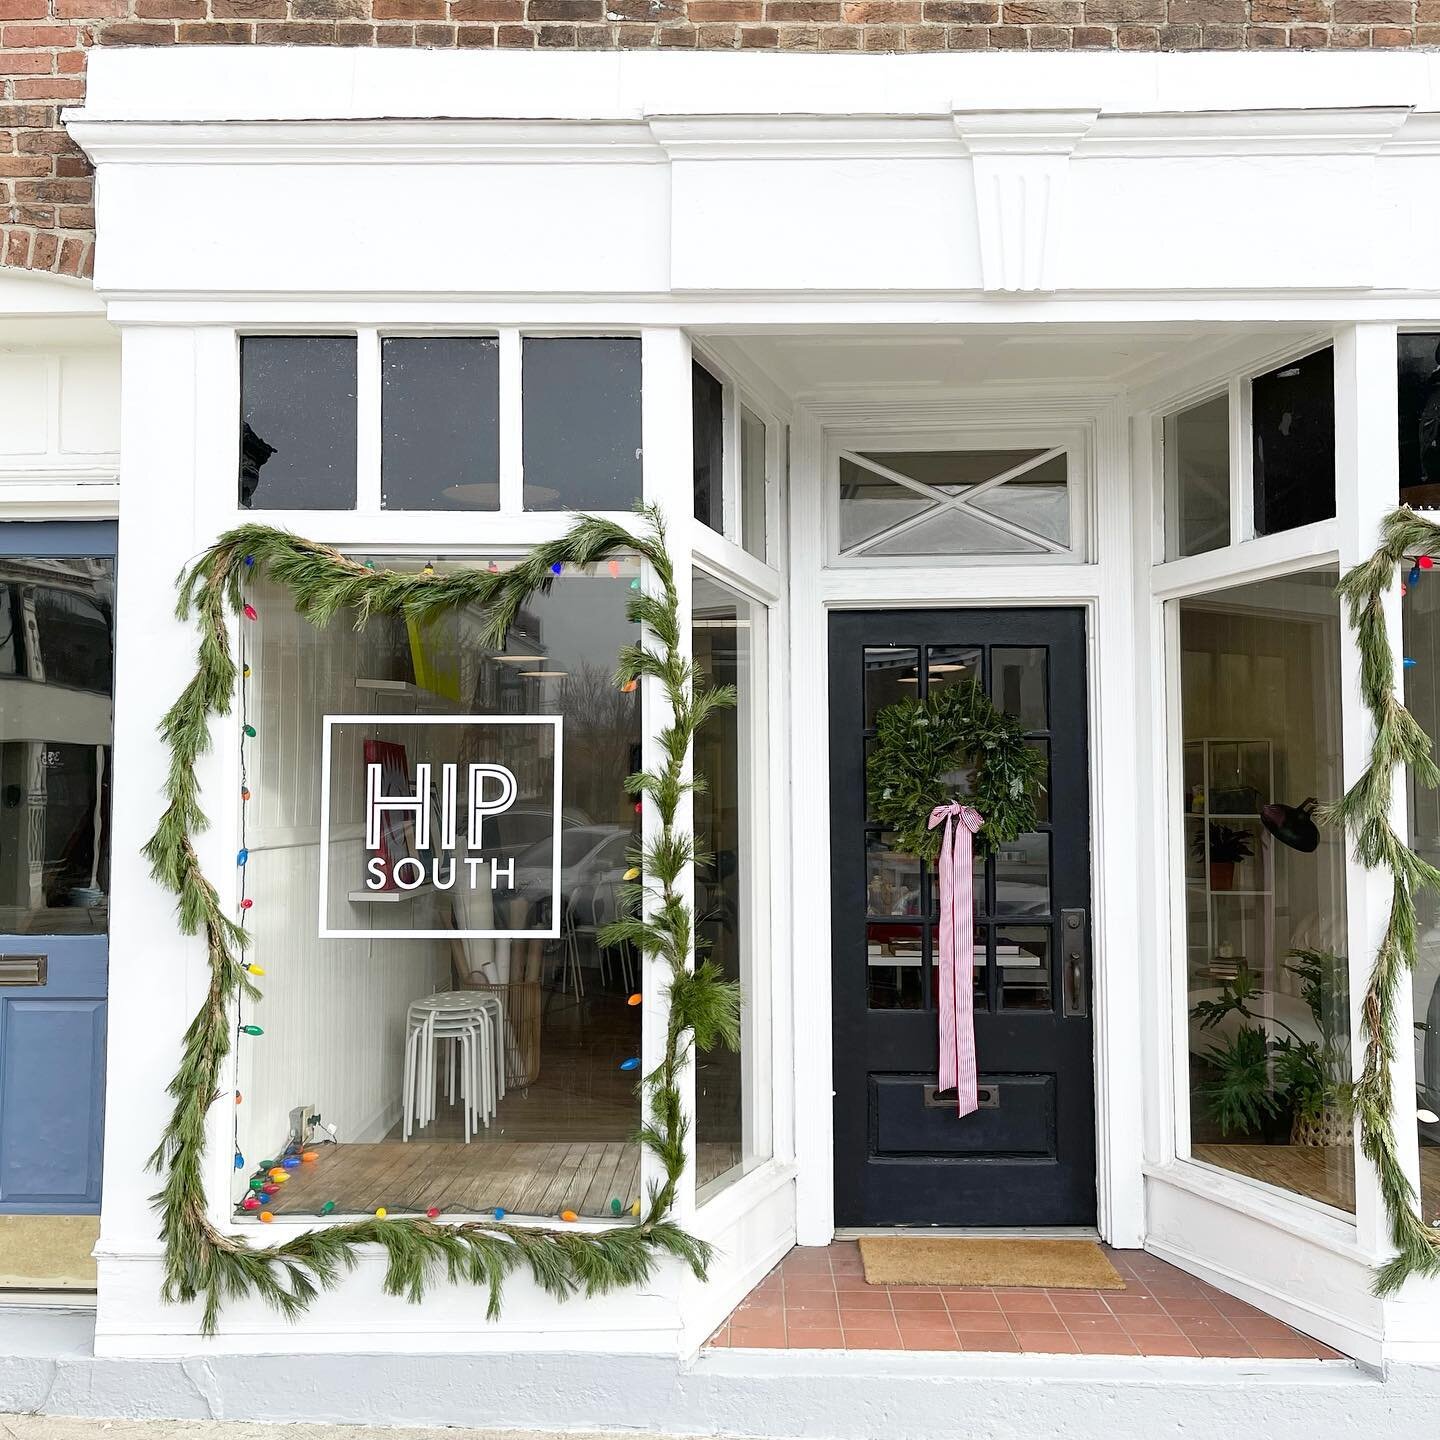 Happy holidays from Hip South! The downtown party runs from 3:00 to 5:00 with shop specials, events, and a sale or two&hellip;.my gift collection is 40% off! The annual Christmas parade begins at 5:00 with you know who making a special appearance🎅🏼